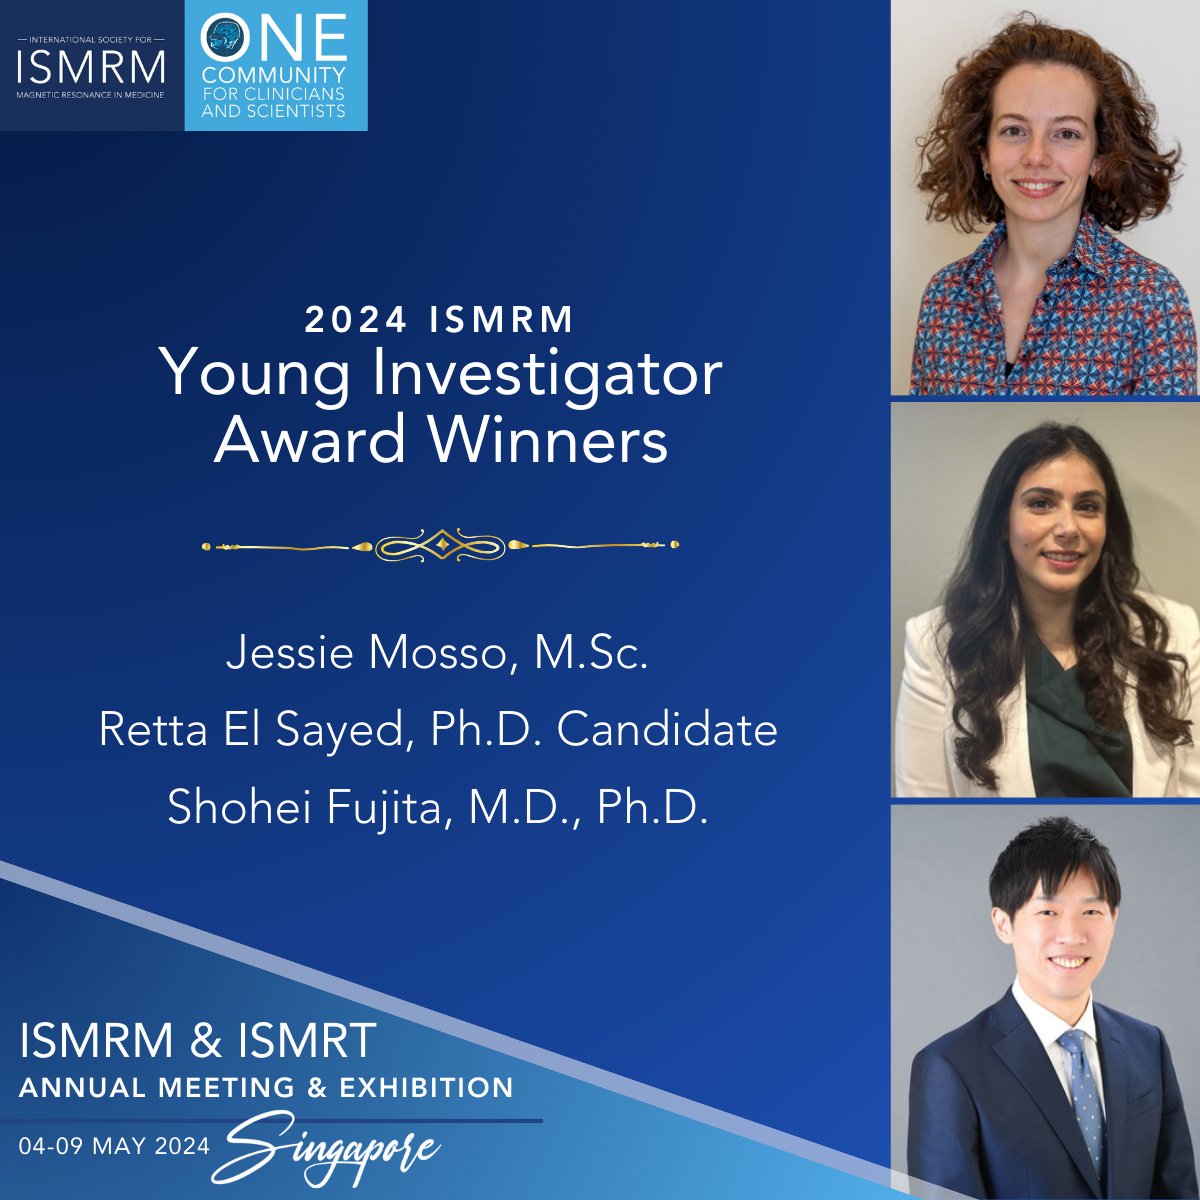 A big congratulations again to the winners of the 2024 ISMRM Young Investigator Awards! ow.ly/TfWr50RNZcl

#ISMRM #ISMRT #ISMRM2024 #ISMRT2024 #MRI #MagneticResonance #MR #MedicalImaging